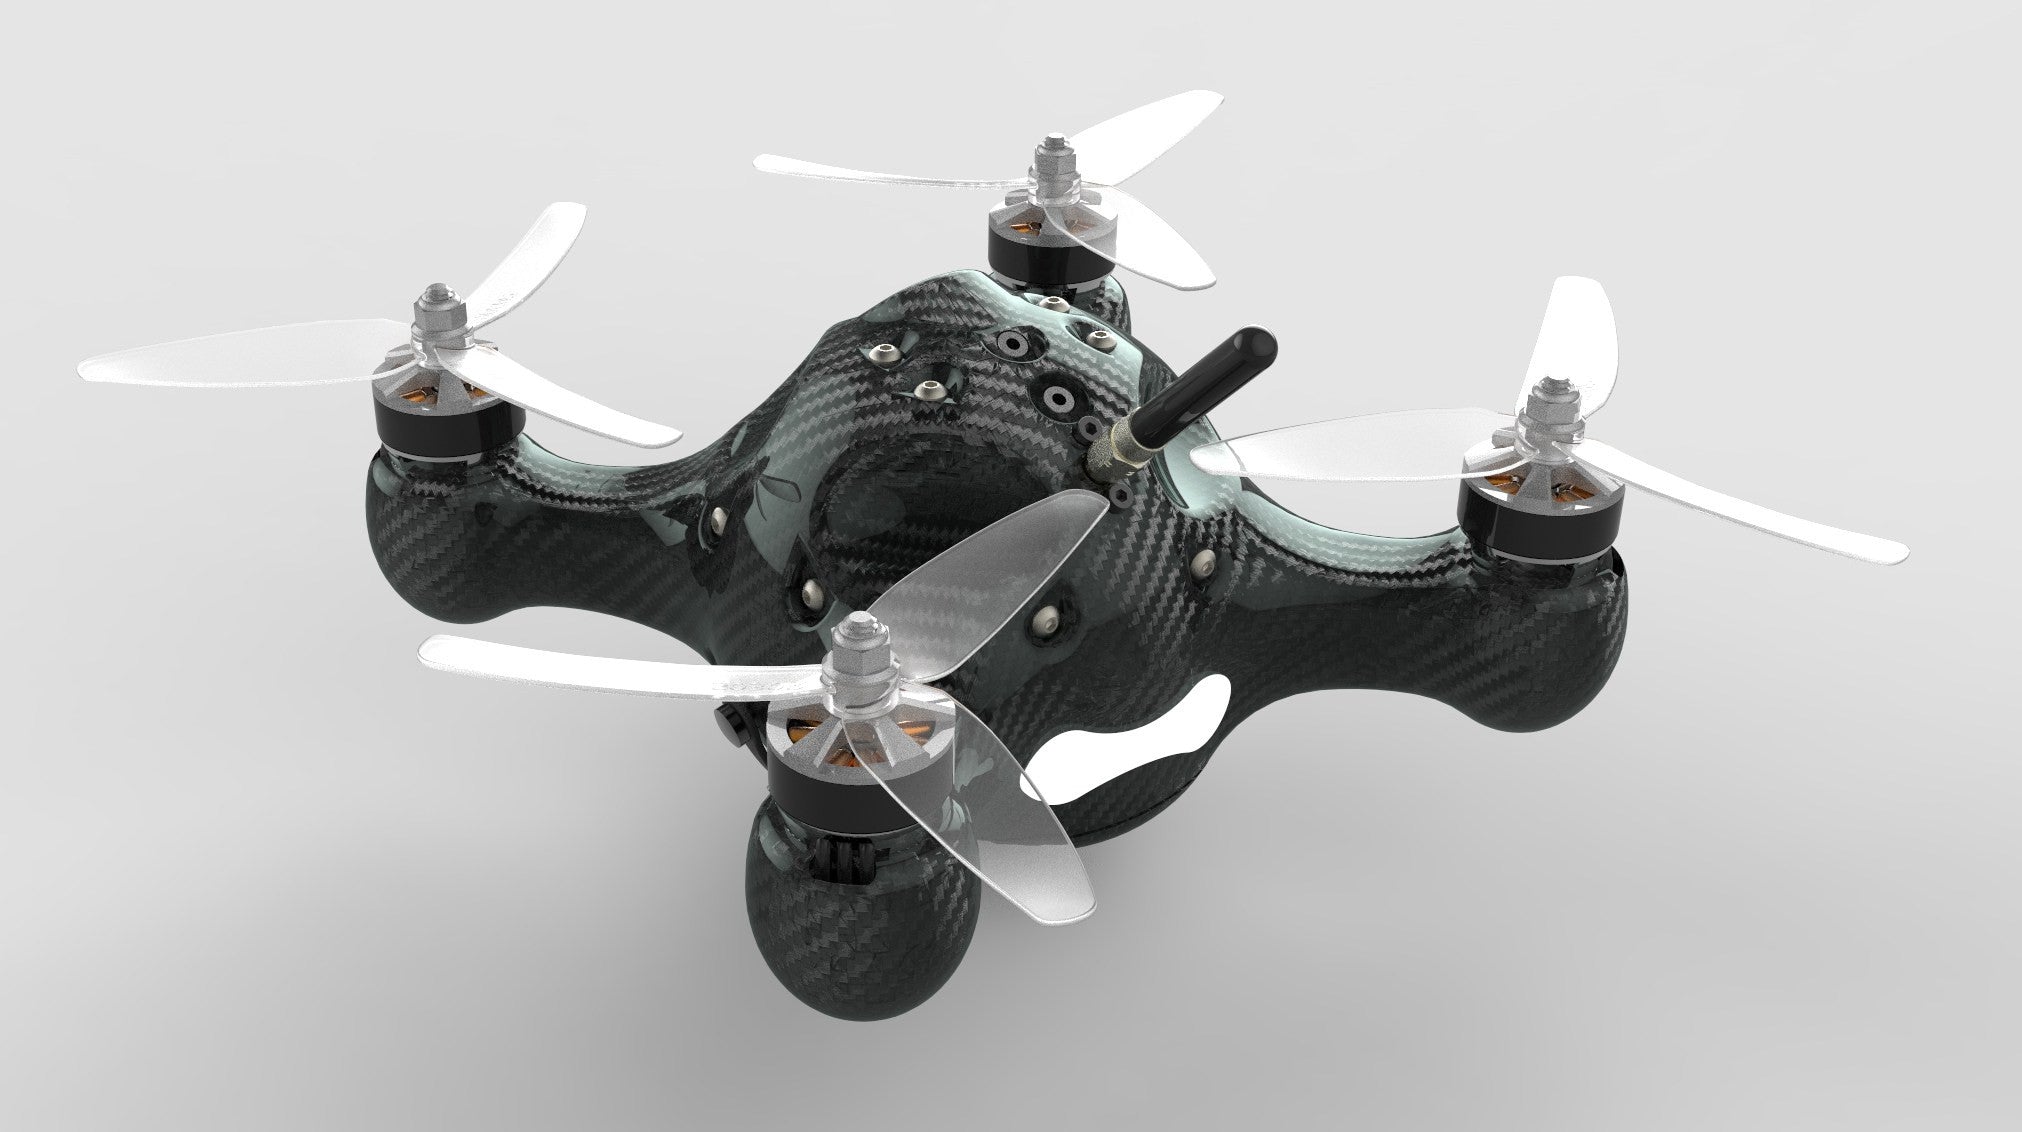 Racing Drone with Fully Enclosed Carbon Fiber Monocoque